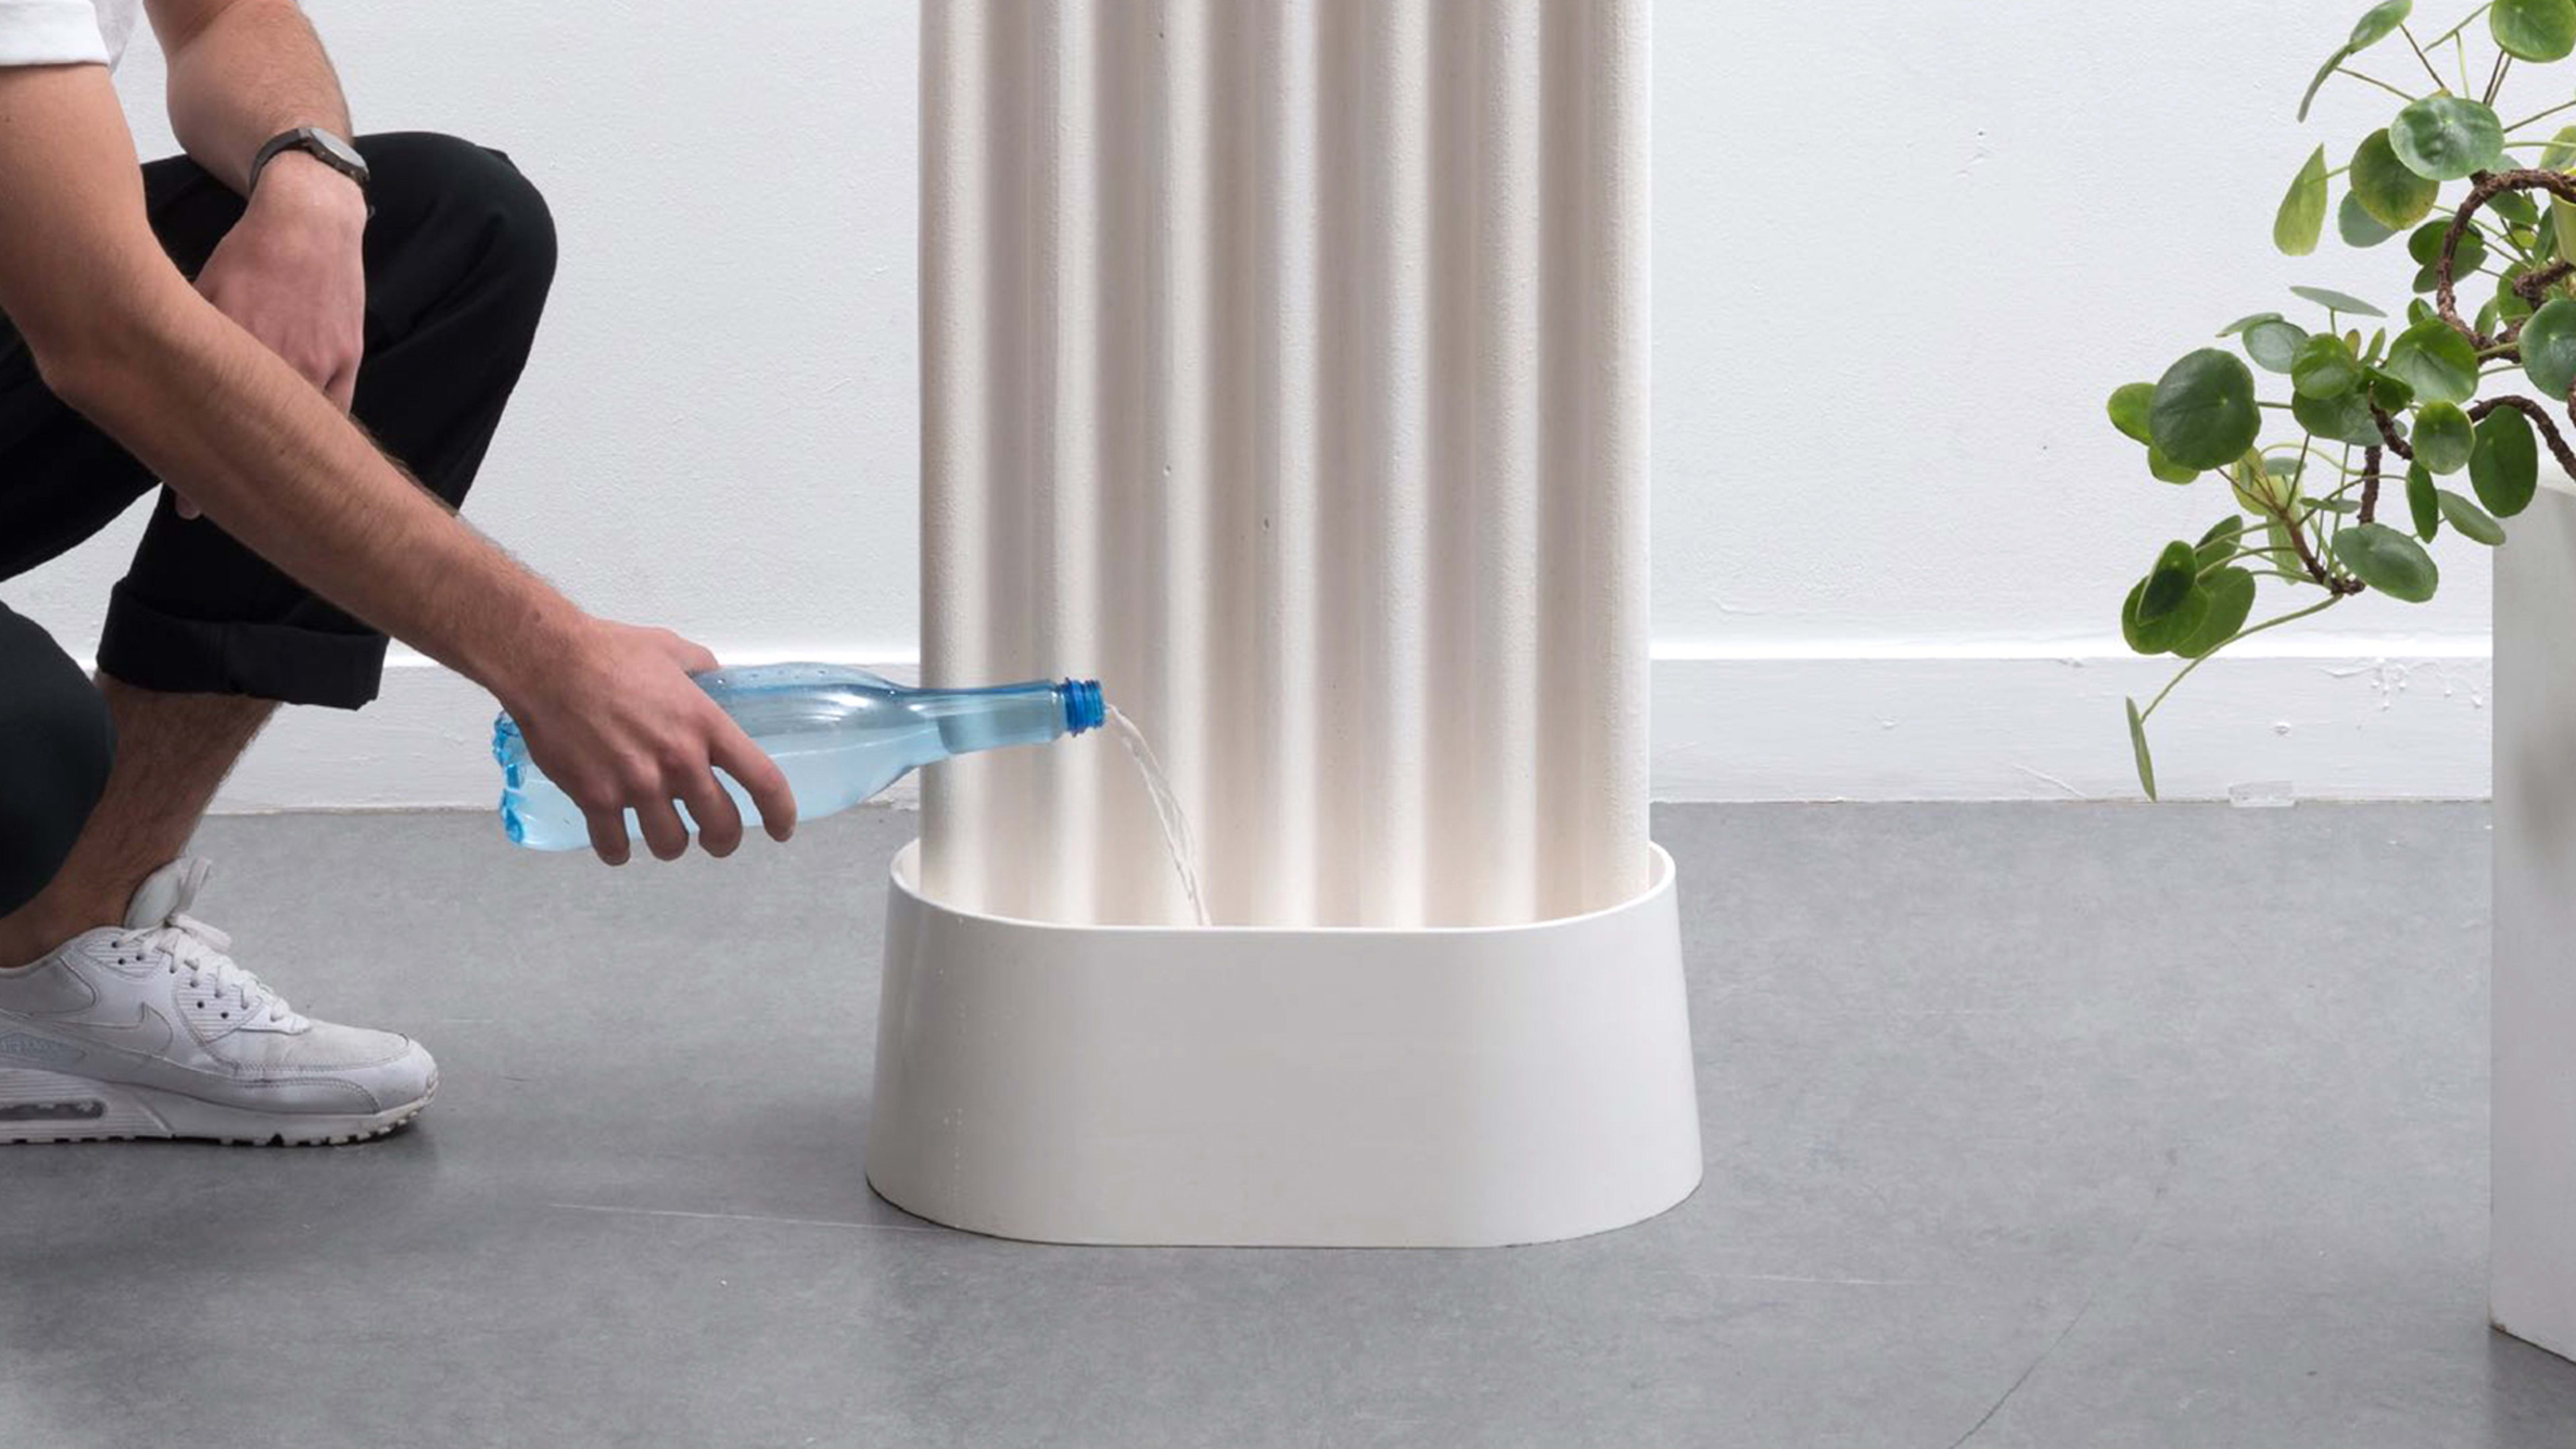 This is the world’s most beautiful air conditioner